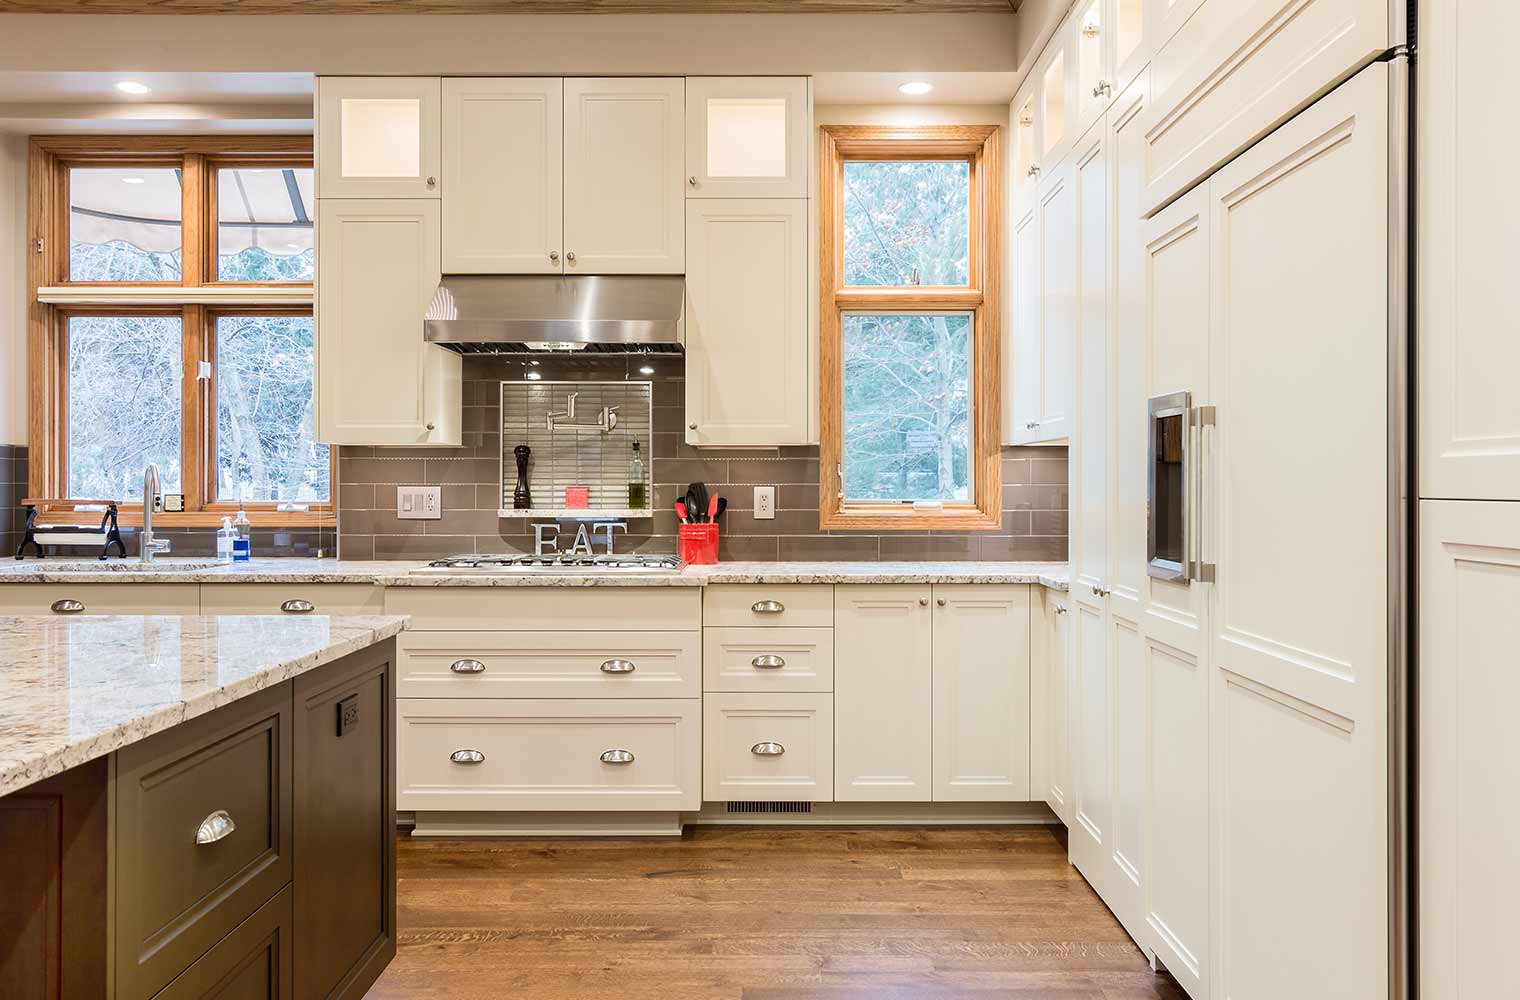 Large kitchen remodel in Clive, Iowa designed and built by Silent Rivers features custom white cabinets, large dark center island, upper display cabinets